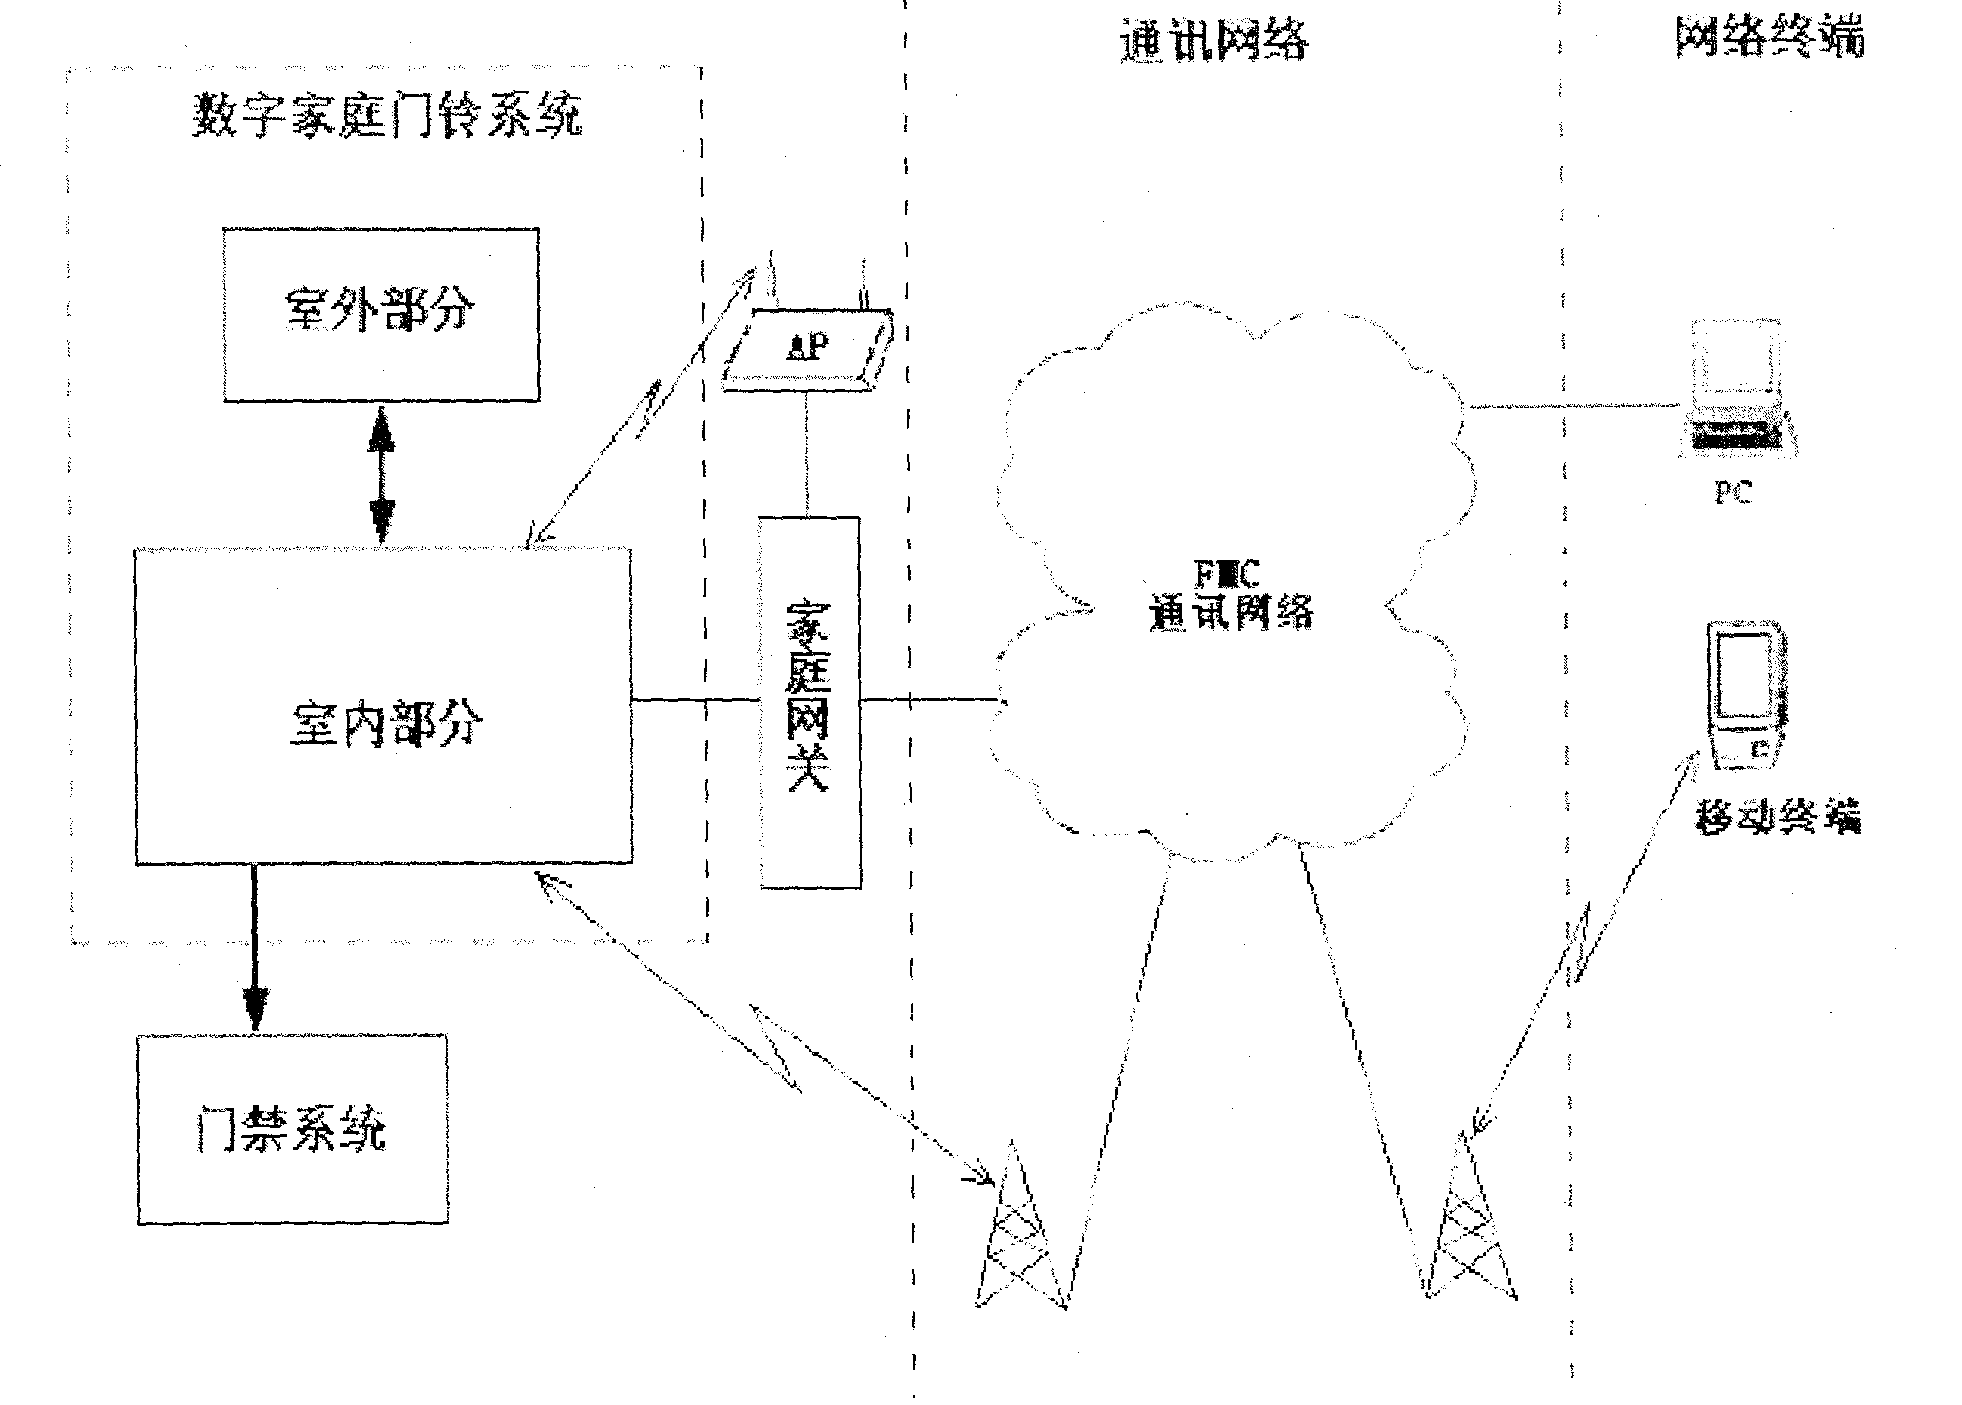 Network terminalized door-bell system and method